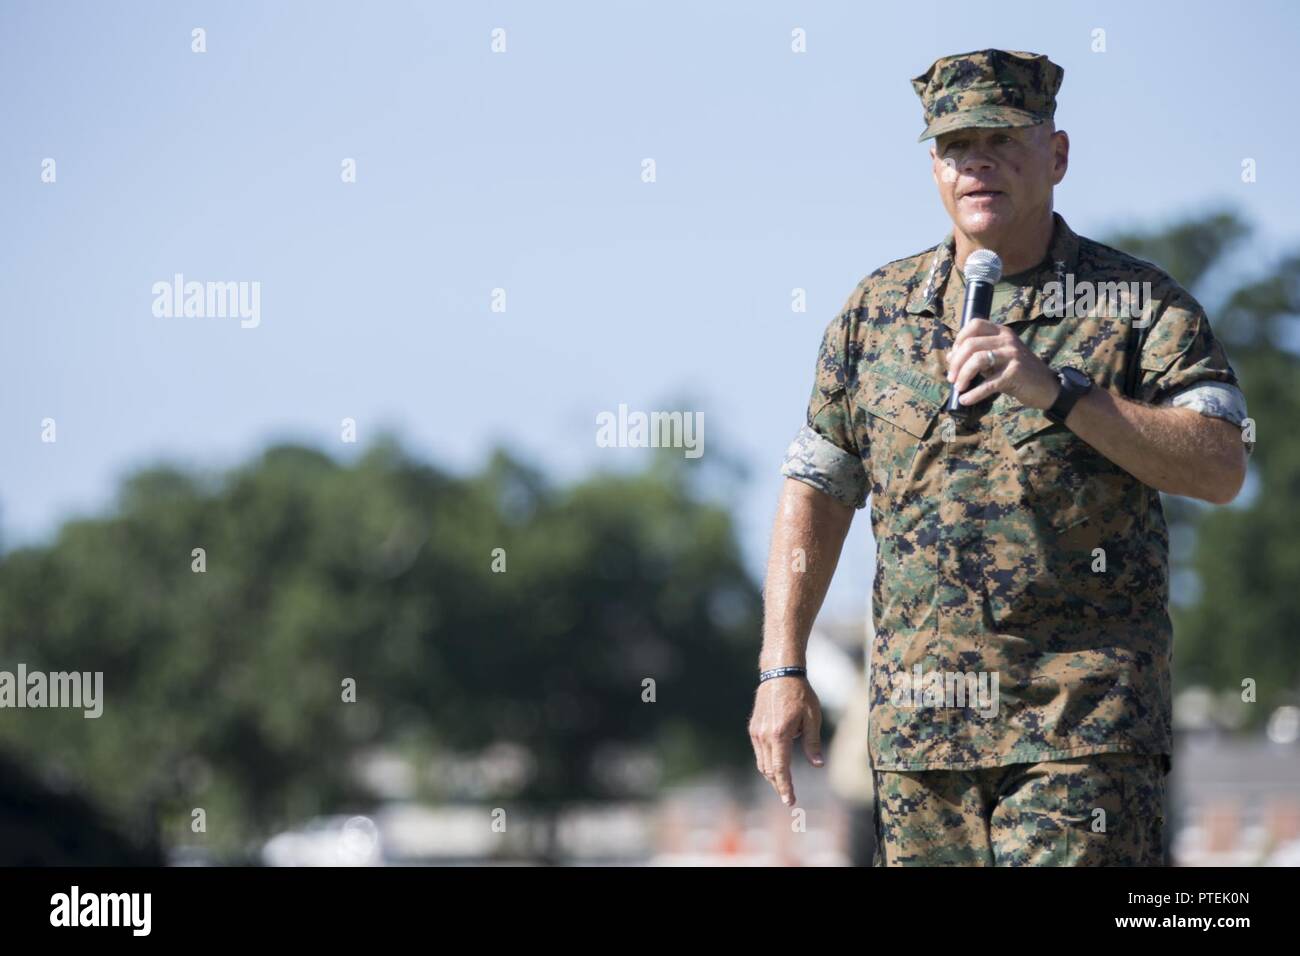 U.S. Marine Corps Gen. Robert B. Neller, commandant of the Marine Corps, speaks to the audience during the II Marine Expeditionary Force (II MEF) change of command ceremony on Camp Lejeune, N.C., July 14, 2017.During the ceremony, Maj. Gen. Walter L. Miller Jr. relinquished his command as commanding general of II MEF to Lt. Gen. Robert F. Hedelund. Stock Photo